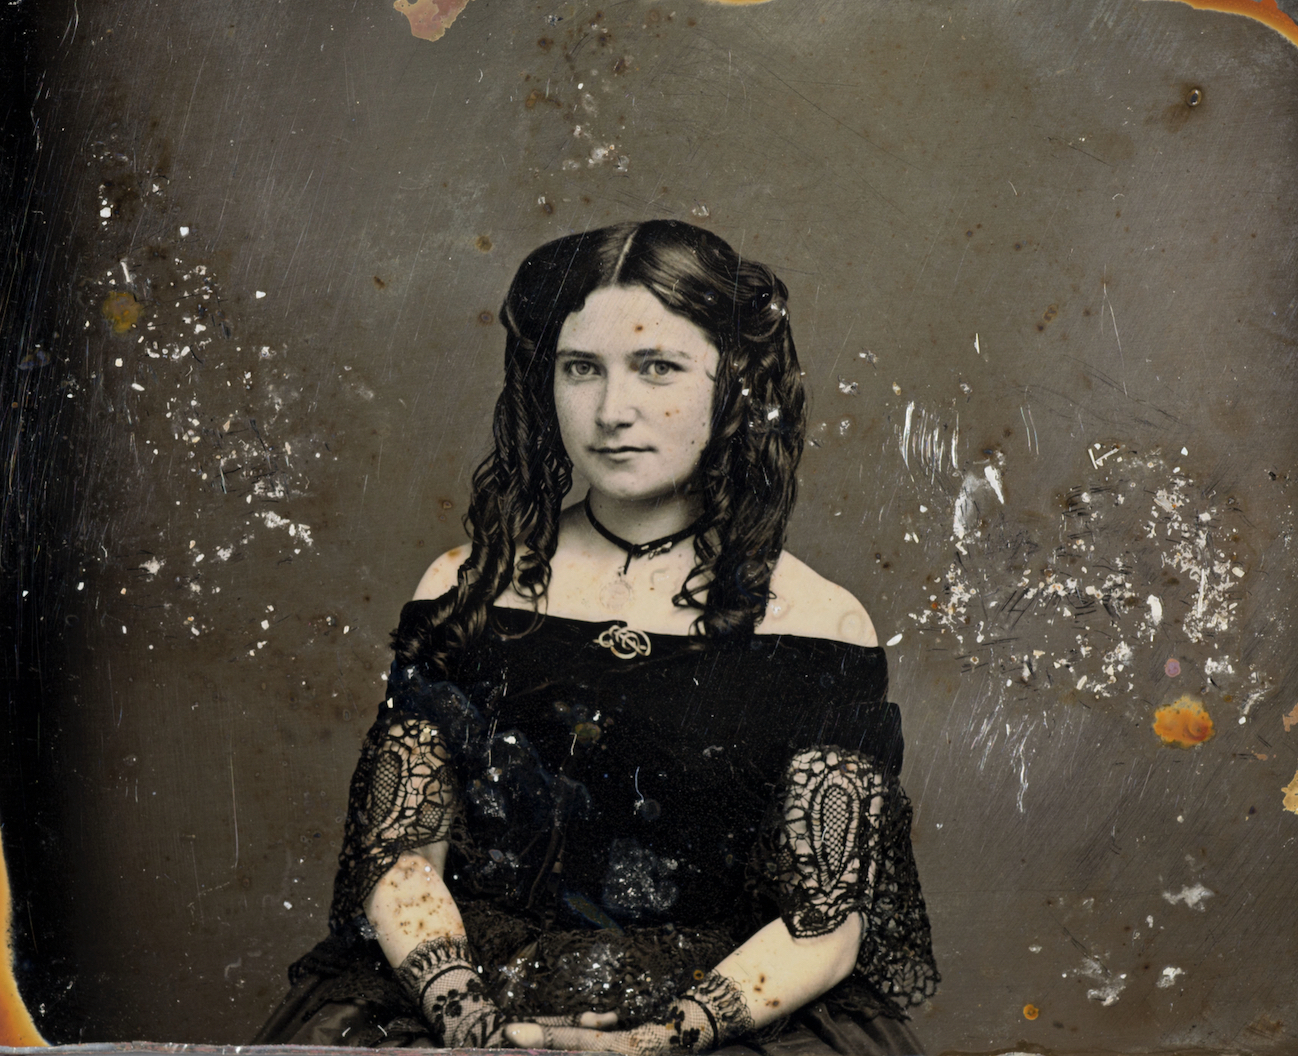 One of the notable artifacts recovered from the wreck of the S.S. Central America is this 19th-century daguerreotype metal plate photograph of an unidentified young woman that the scientific mission recovery team nicknamed the Mona Lisa of the Deep. Photo credit: Holabird Western Americana Collections.